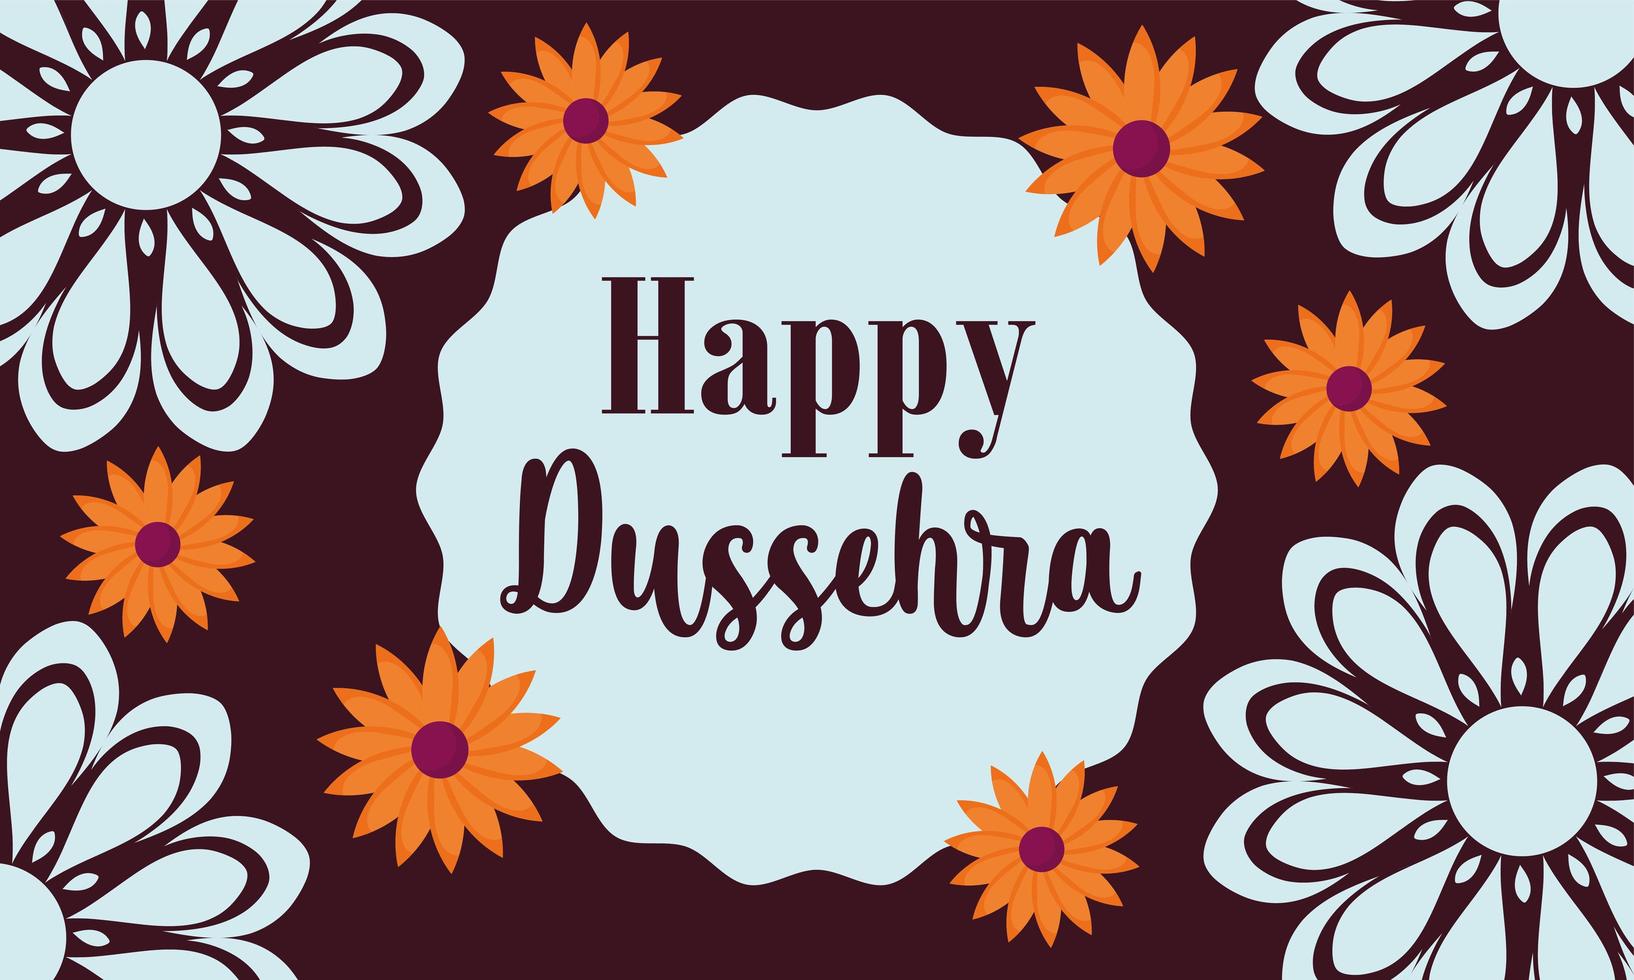 happy dussehra festival of india, traditional religious ritual flowers floral decoration banner vector